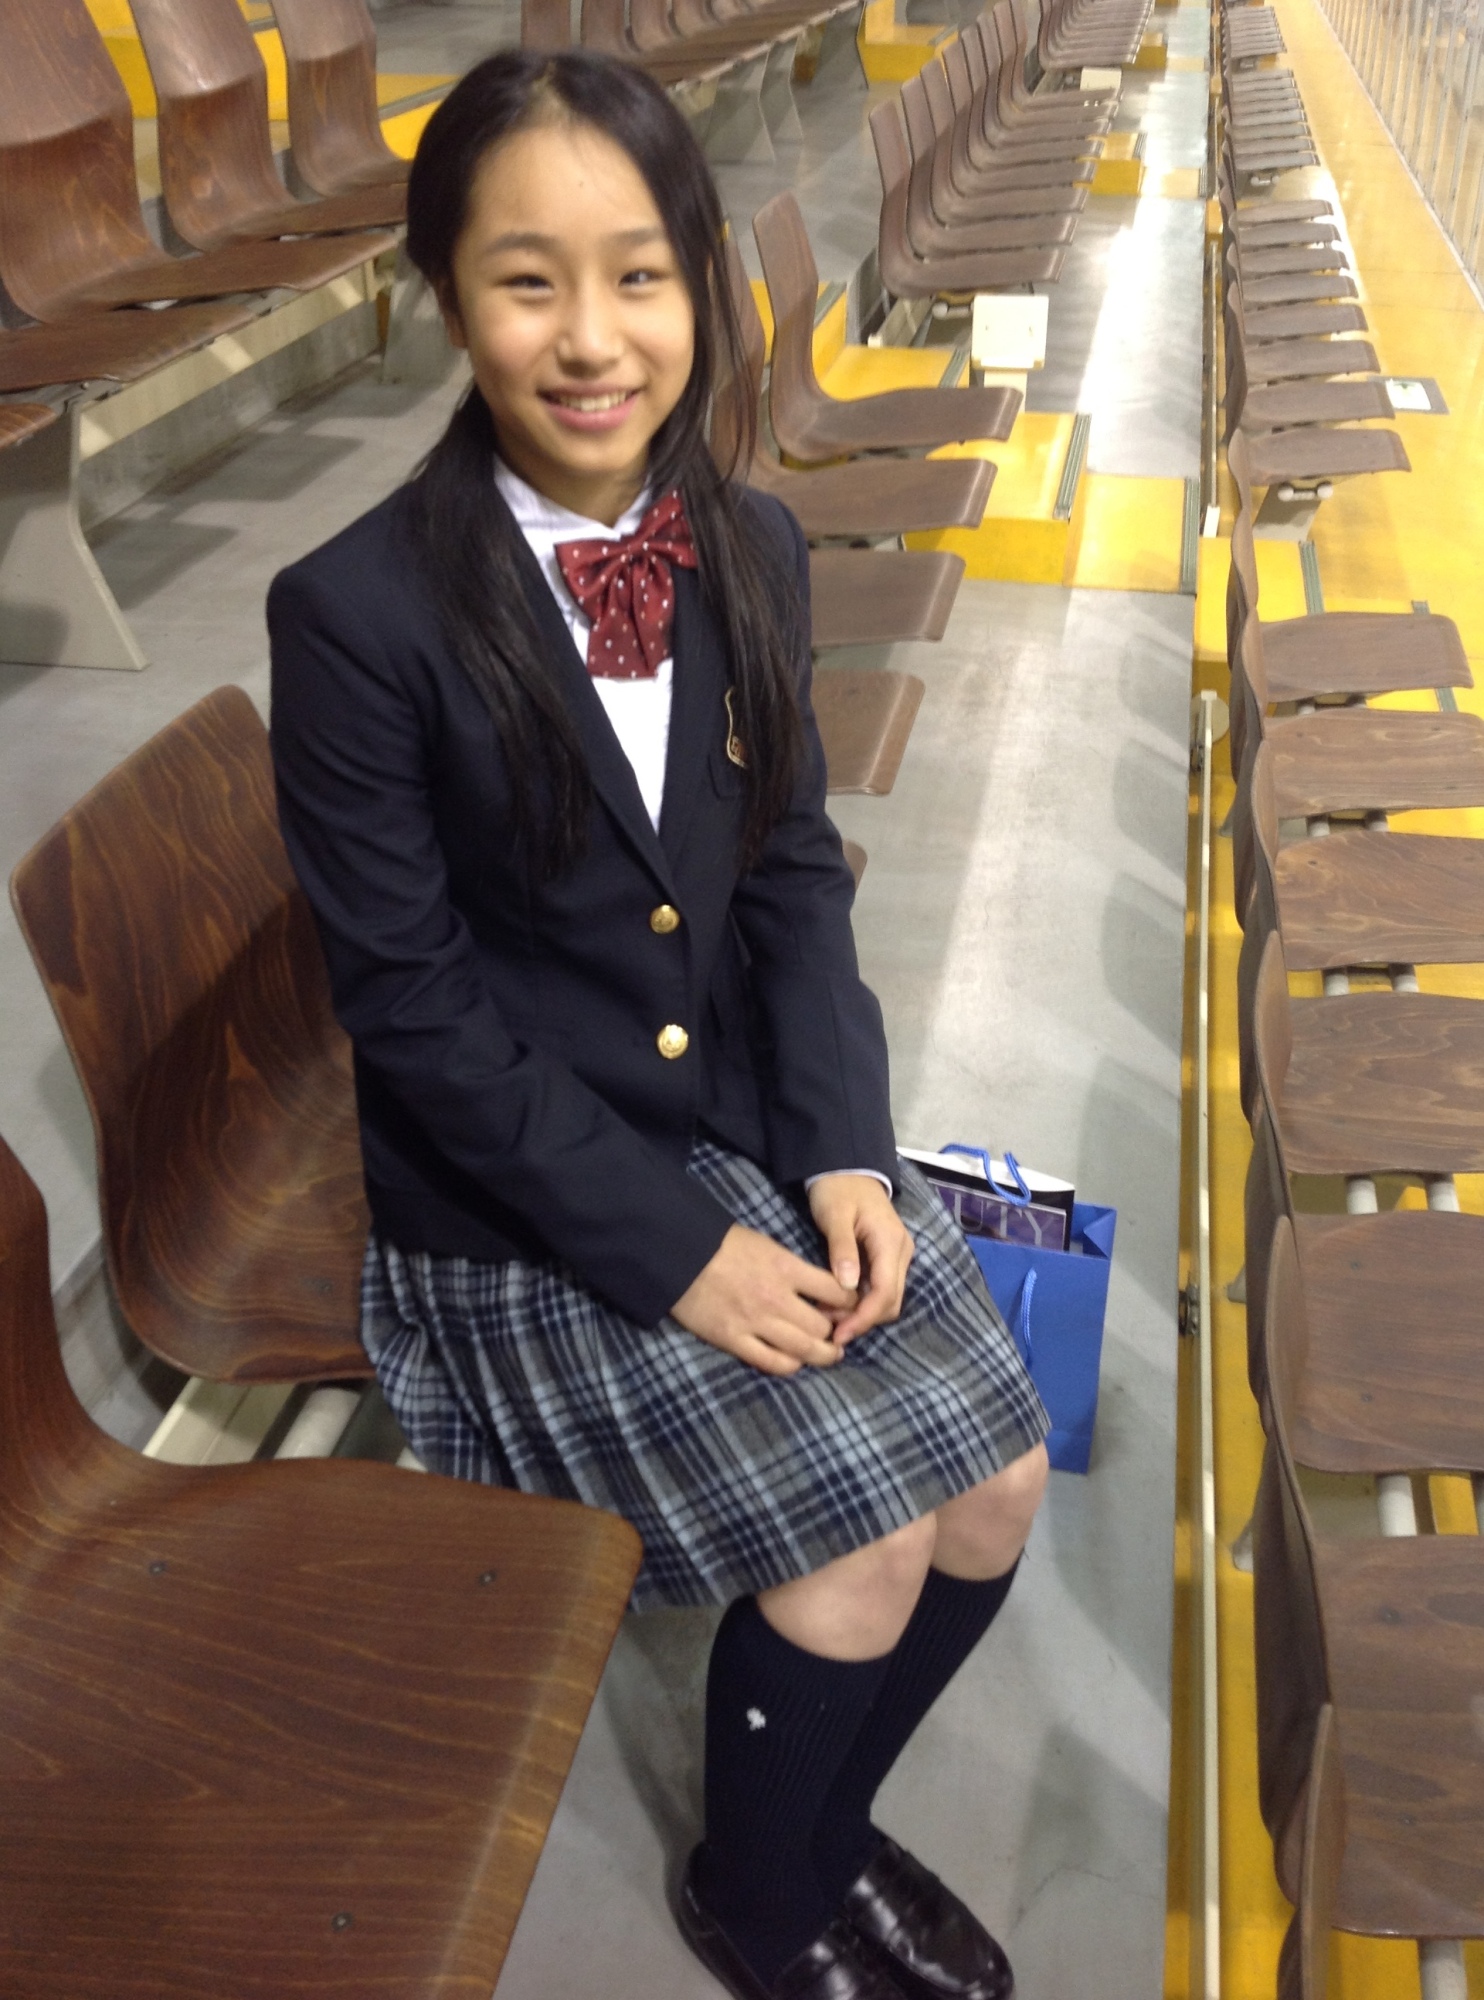 Mako Yamashita, who has earned a pair of Junior Grand Prix medals this season, is among the top contenders in the women's singles competition at the Japan Junior Championships this weekend at Gunma Ice Arena. | JACK GALLAGHER